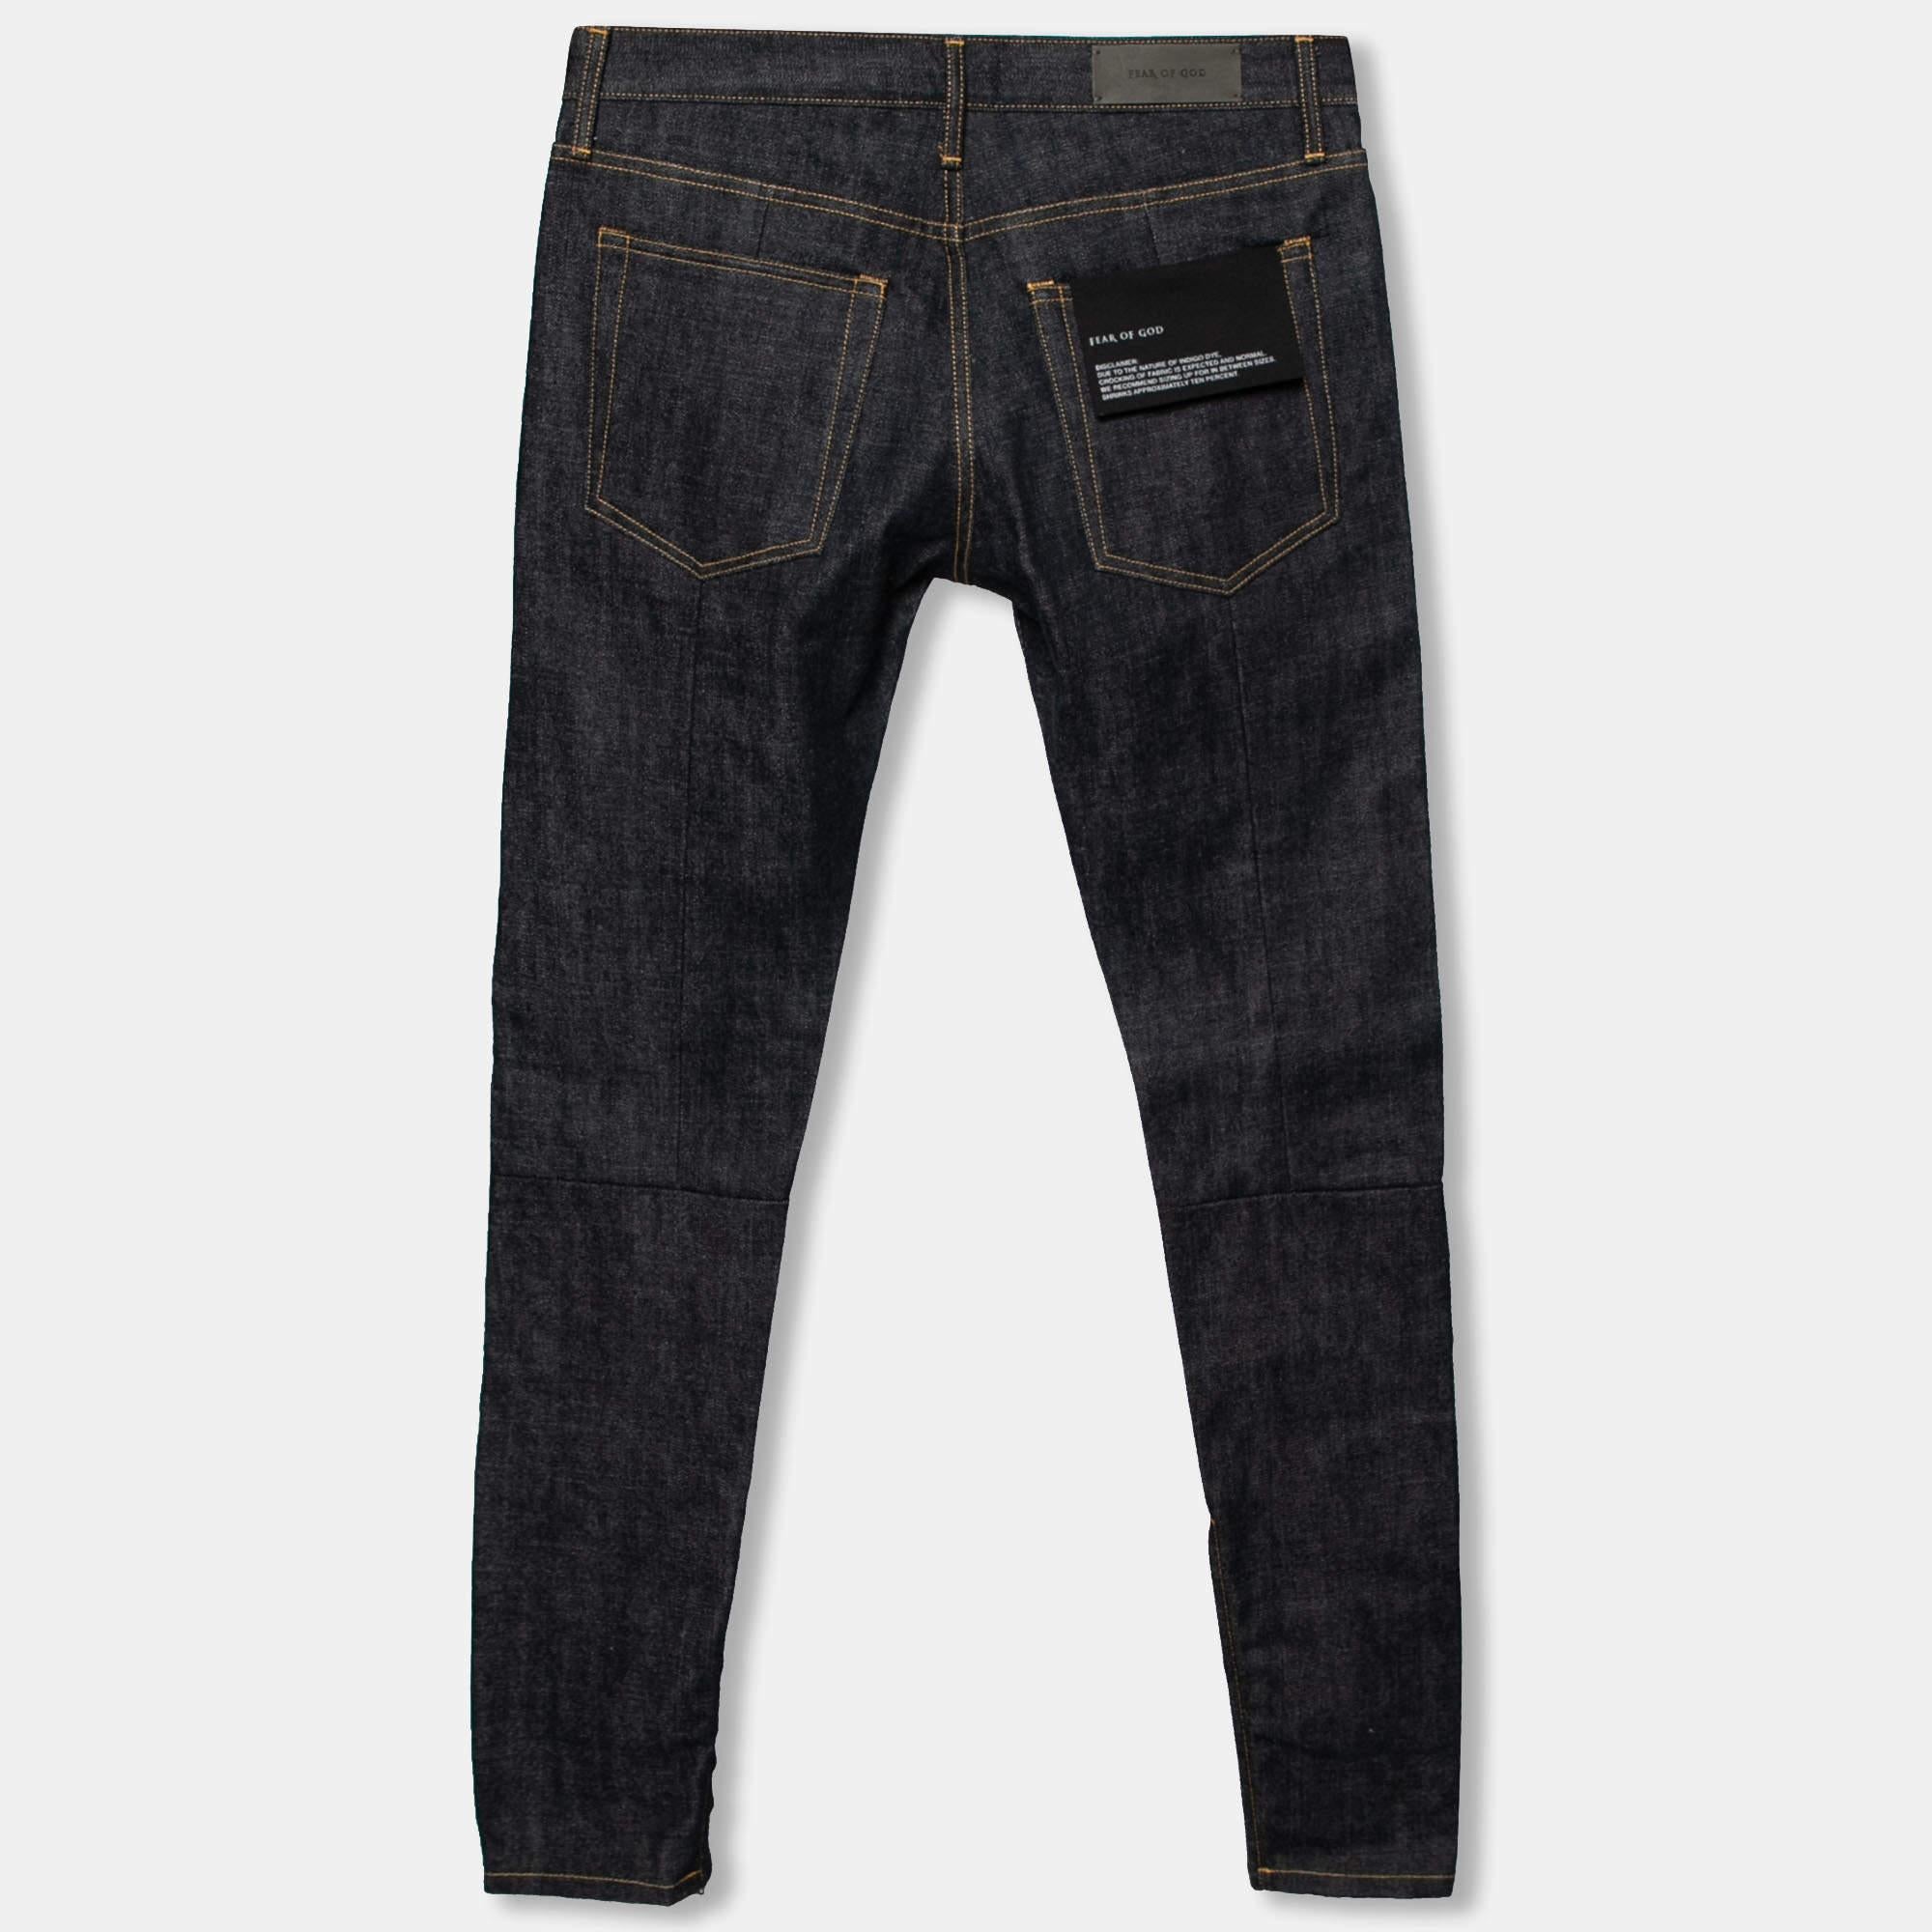 Fear of God brings you these super-cool and comfortable jeans for regular wear. This pair of jeans is made from navy blue cotton in a slim-fit style and is detailed with pockets and zipped hems.

Includes: Brand tag